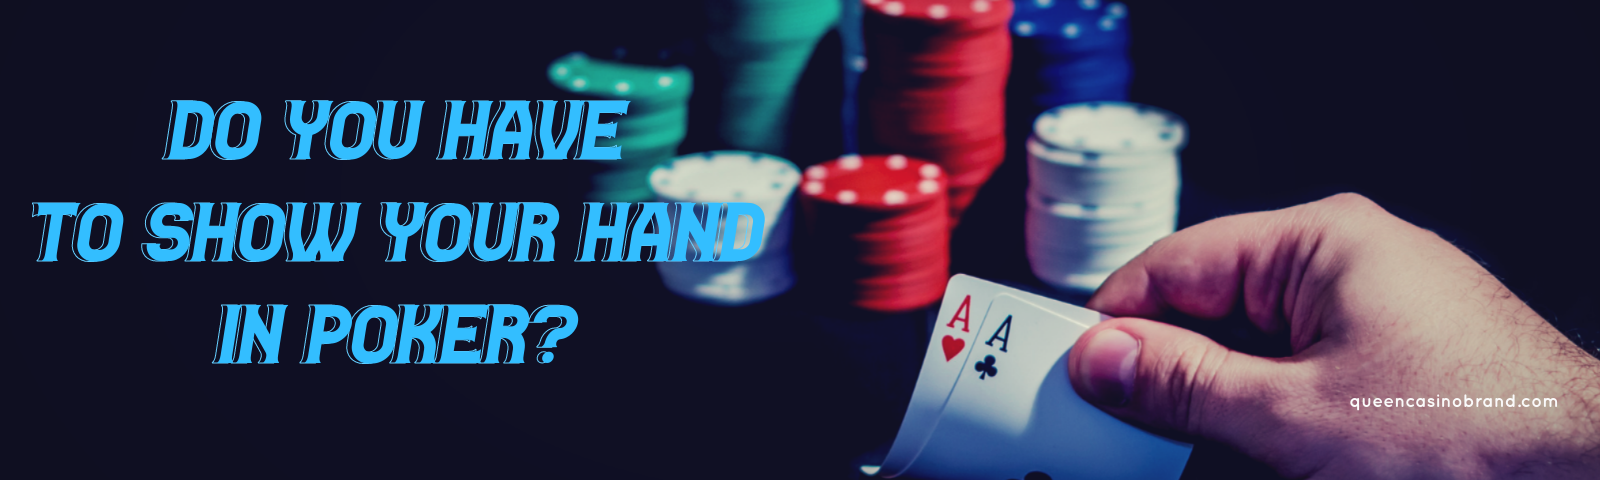 Do You Have to Show Your Hand in Poker - Queen Casino Brand